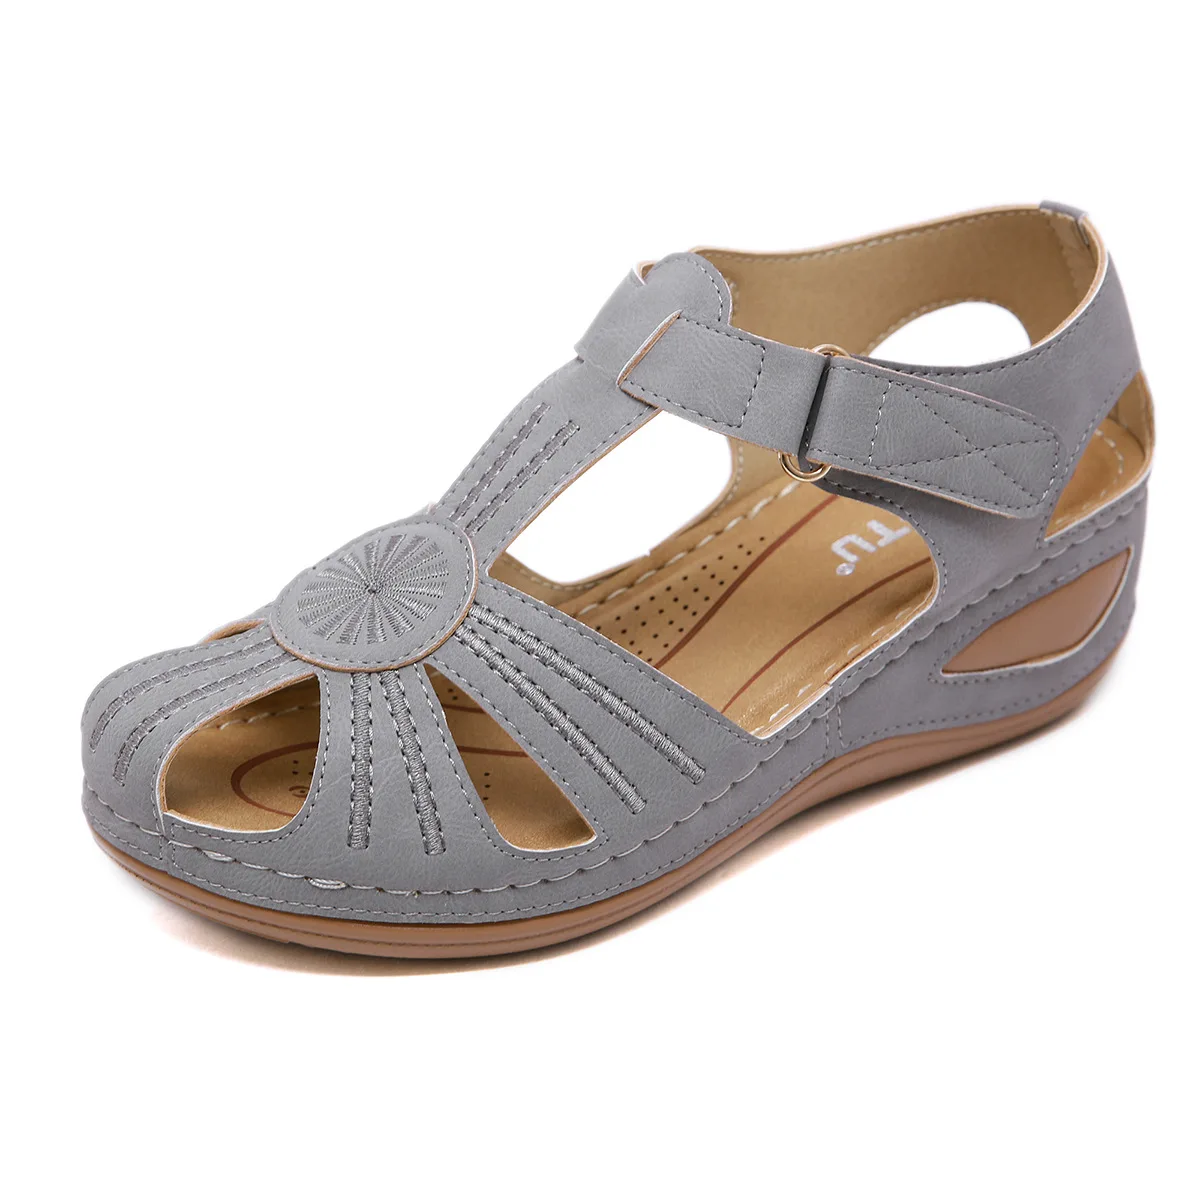 

SIKETU Brand Casual Summer Retro Wedge Sandals Sewing Thread Hook Loop Buckle An-ti Skid Shoes Closed Toe T-strap Chunky Soft 44